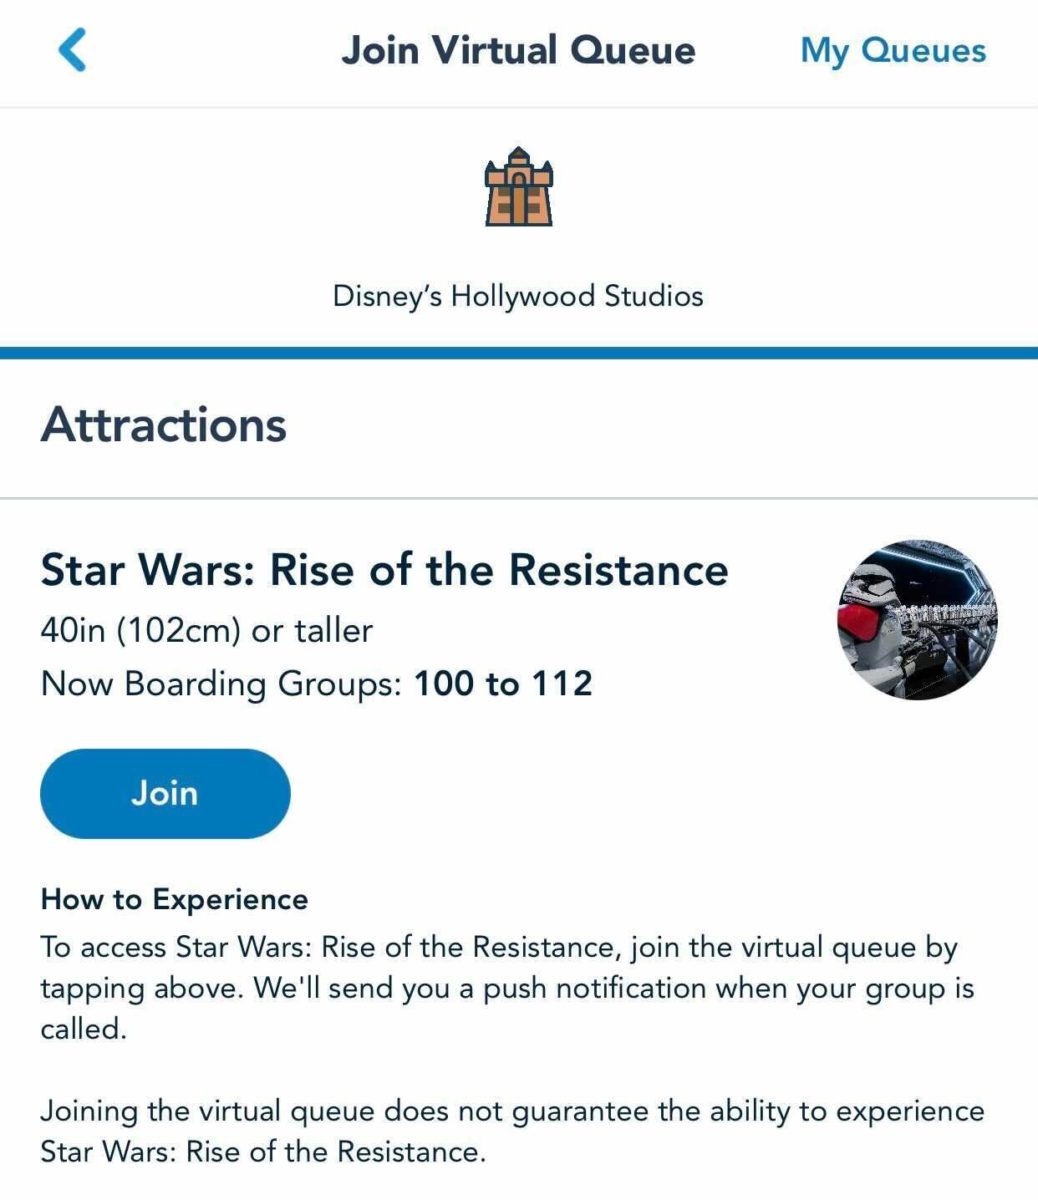 star-wars-rise-of-the-resistance-boarding-groups-7355228